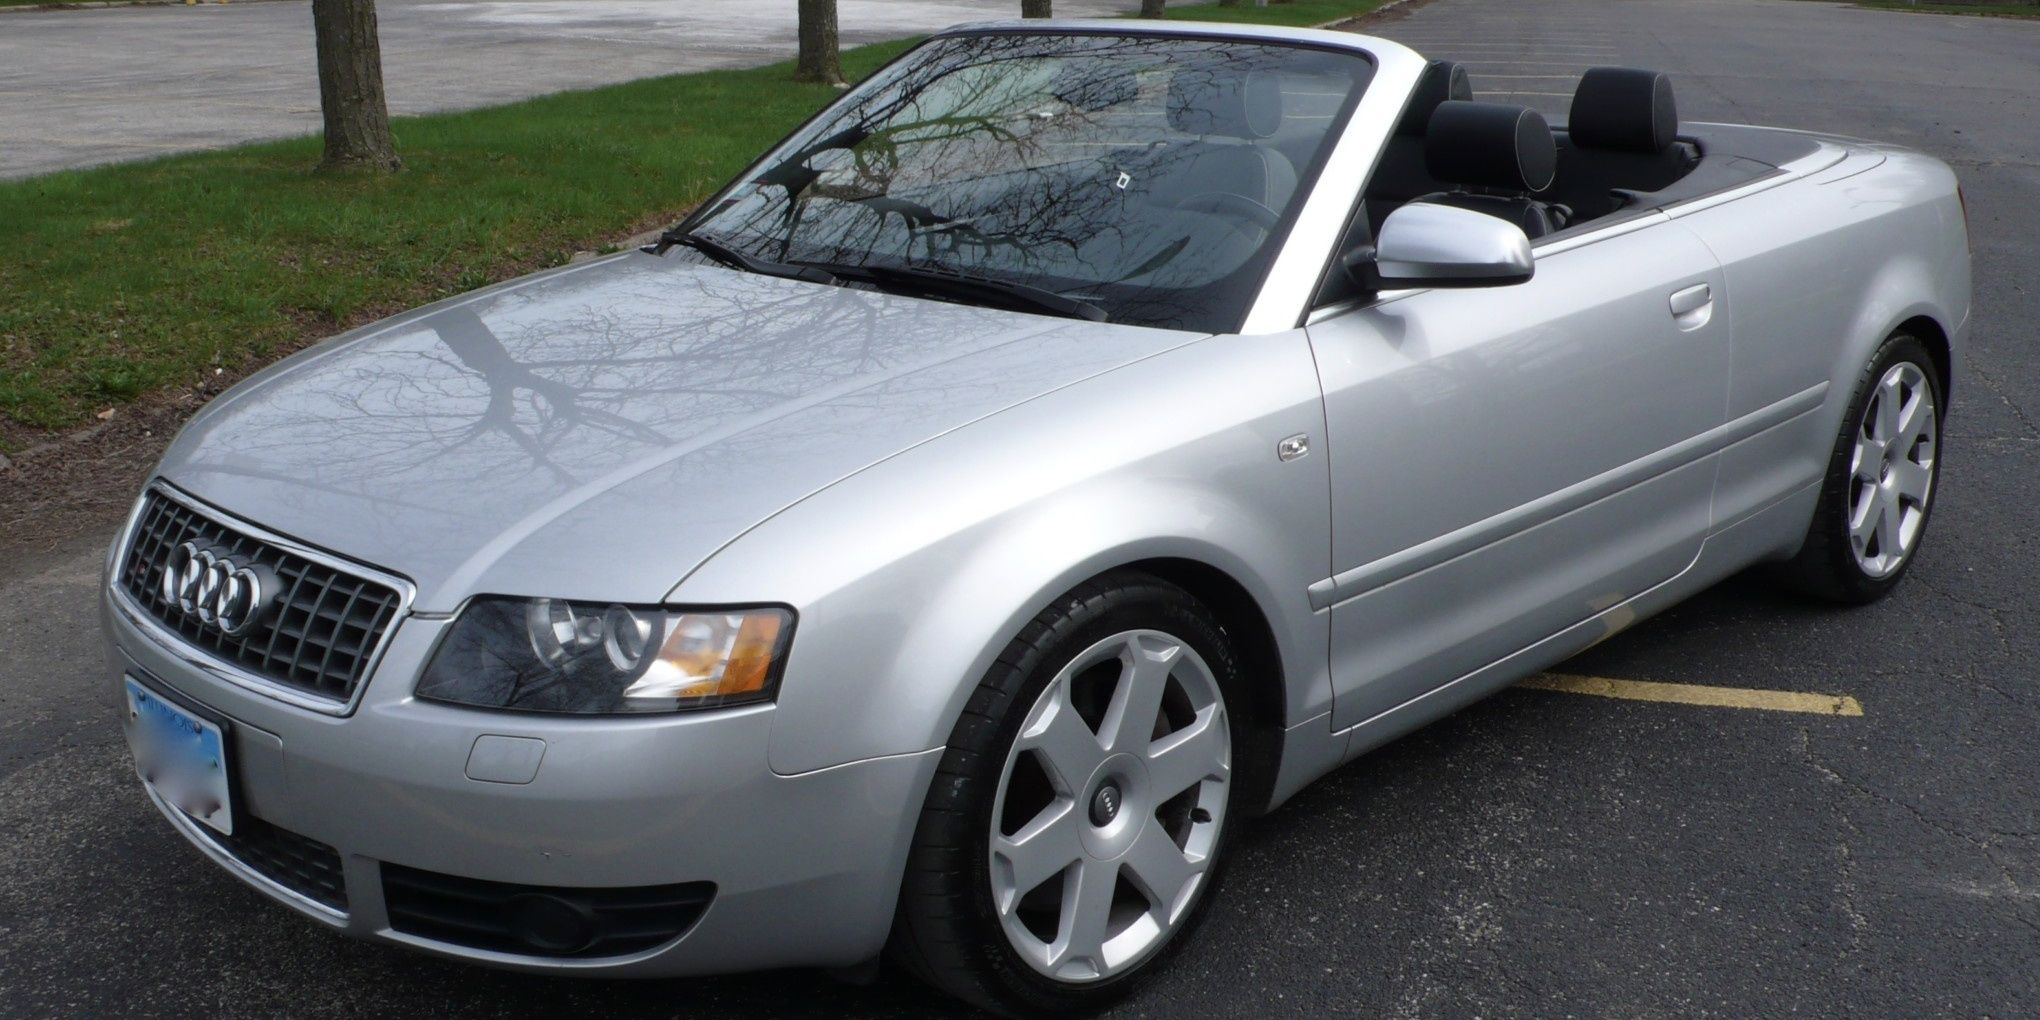 2005 Audi S4 Convertible Cropped